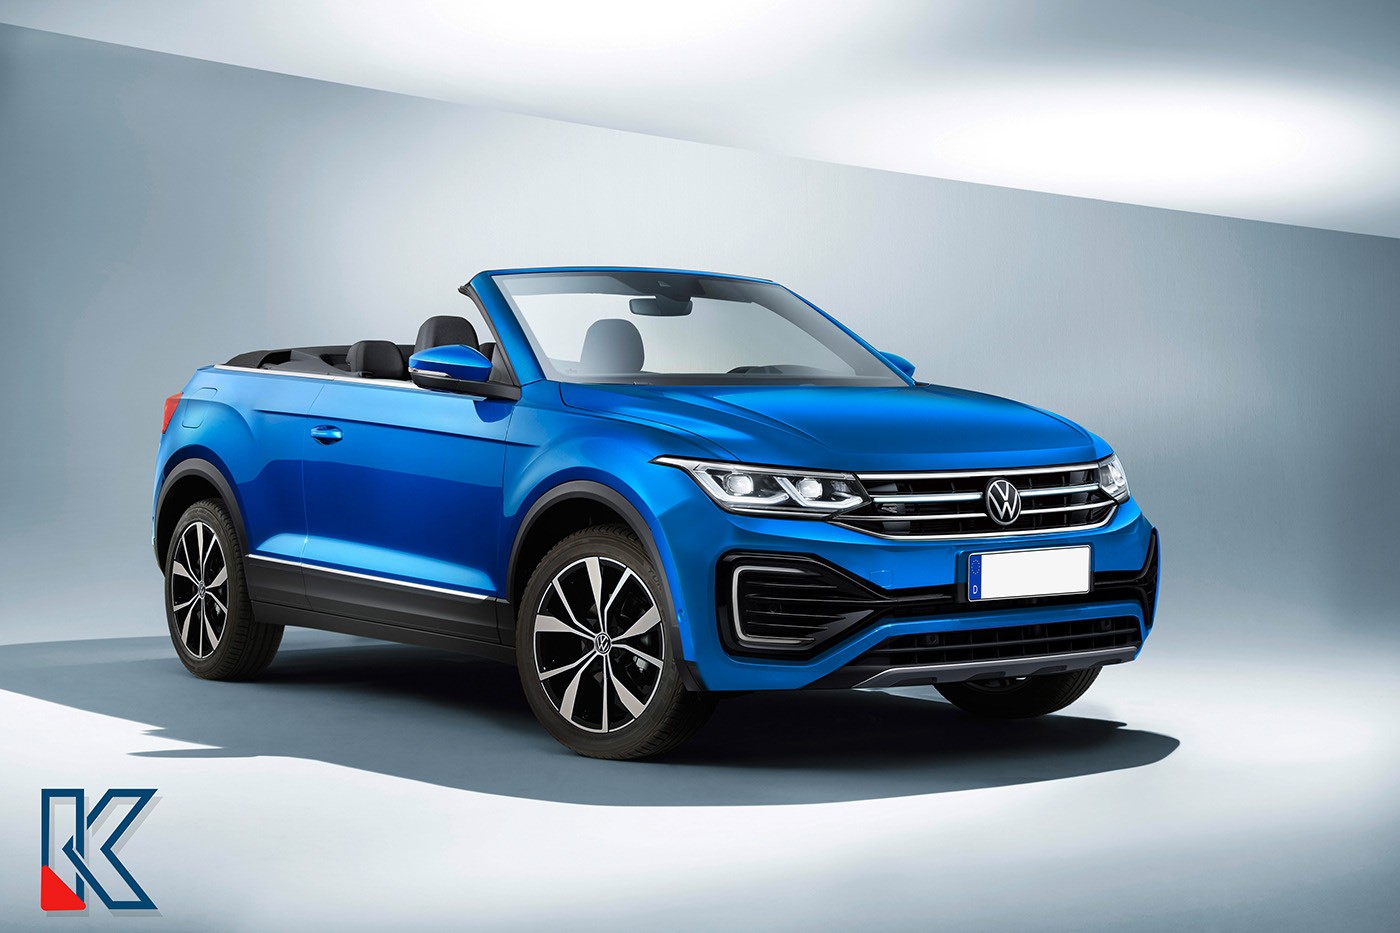 2022 Volkswagen T-Roc Facelift Revealed To Remind Us Of The Cabriolet SUV